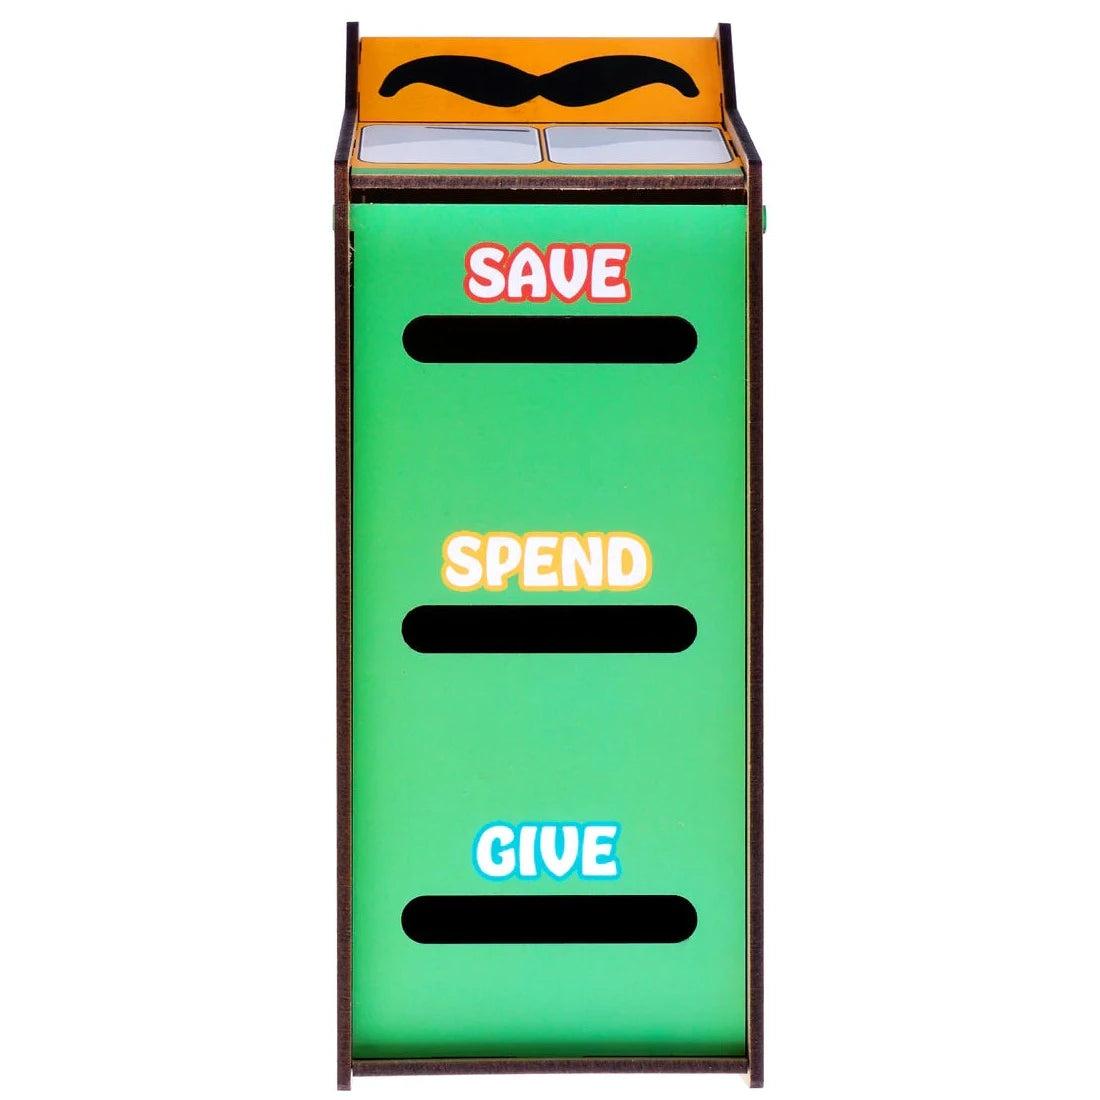 Taco truck piggy bank - top view. Three slots labeled "SAVE," "SPEND" and "GIVE" on green background.